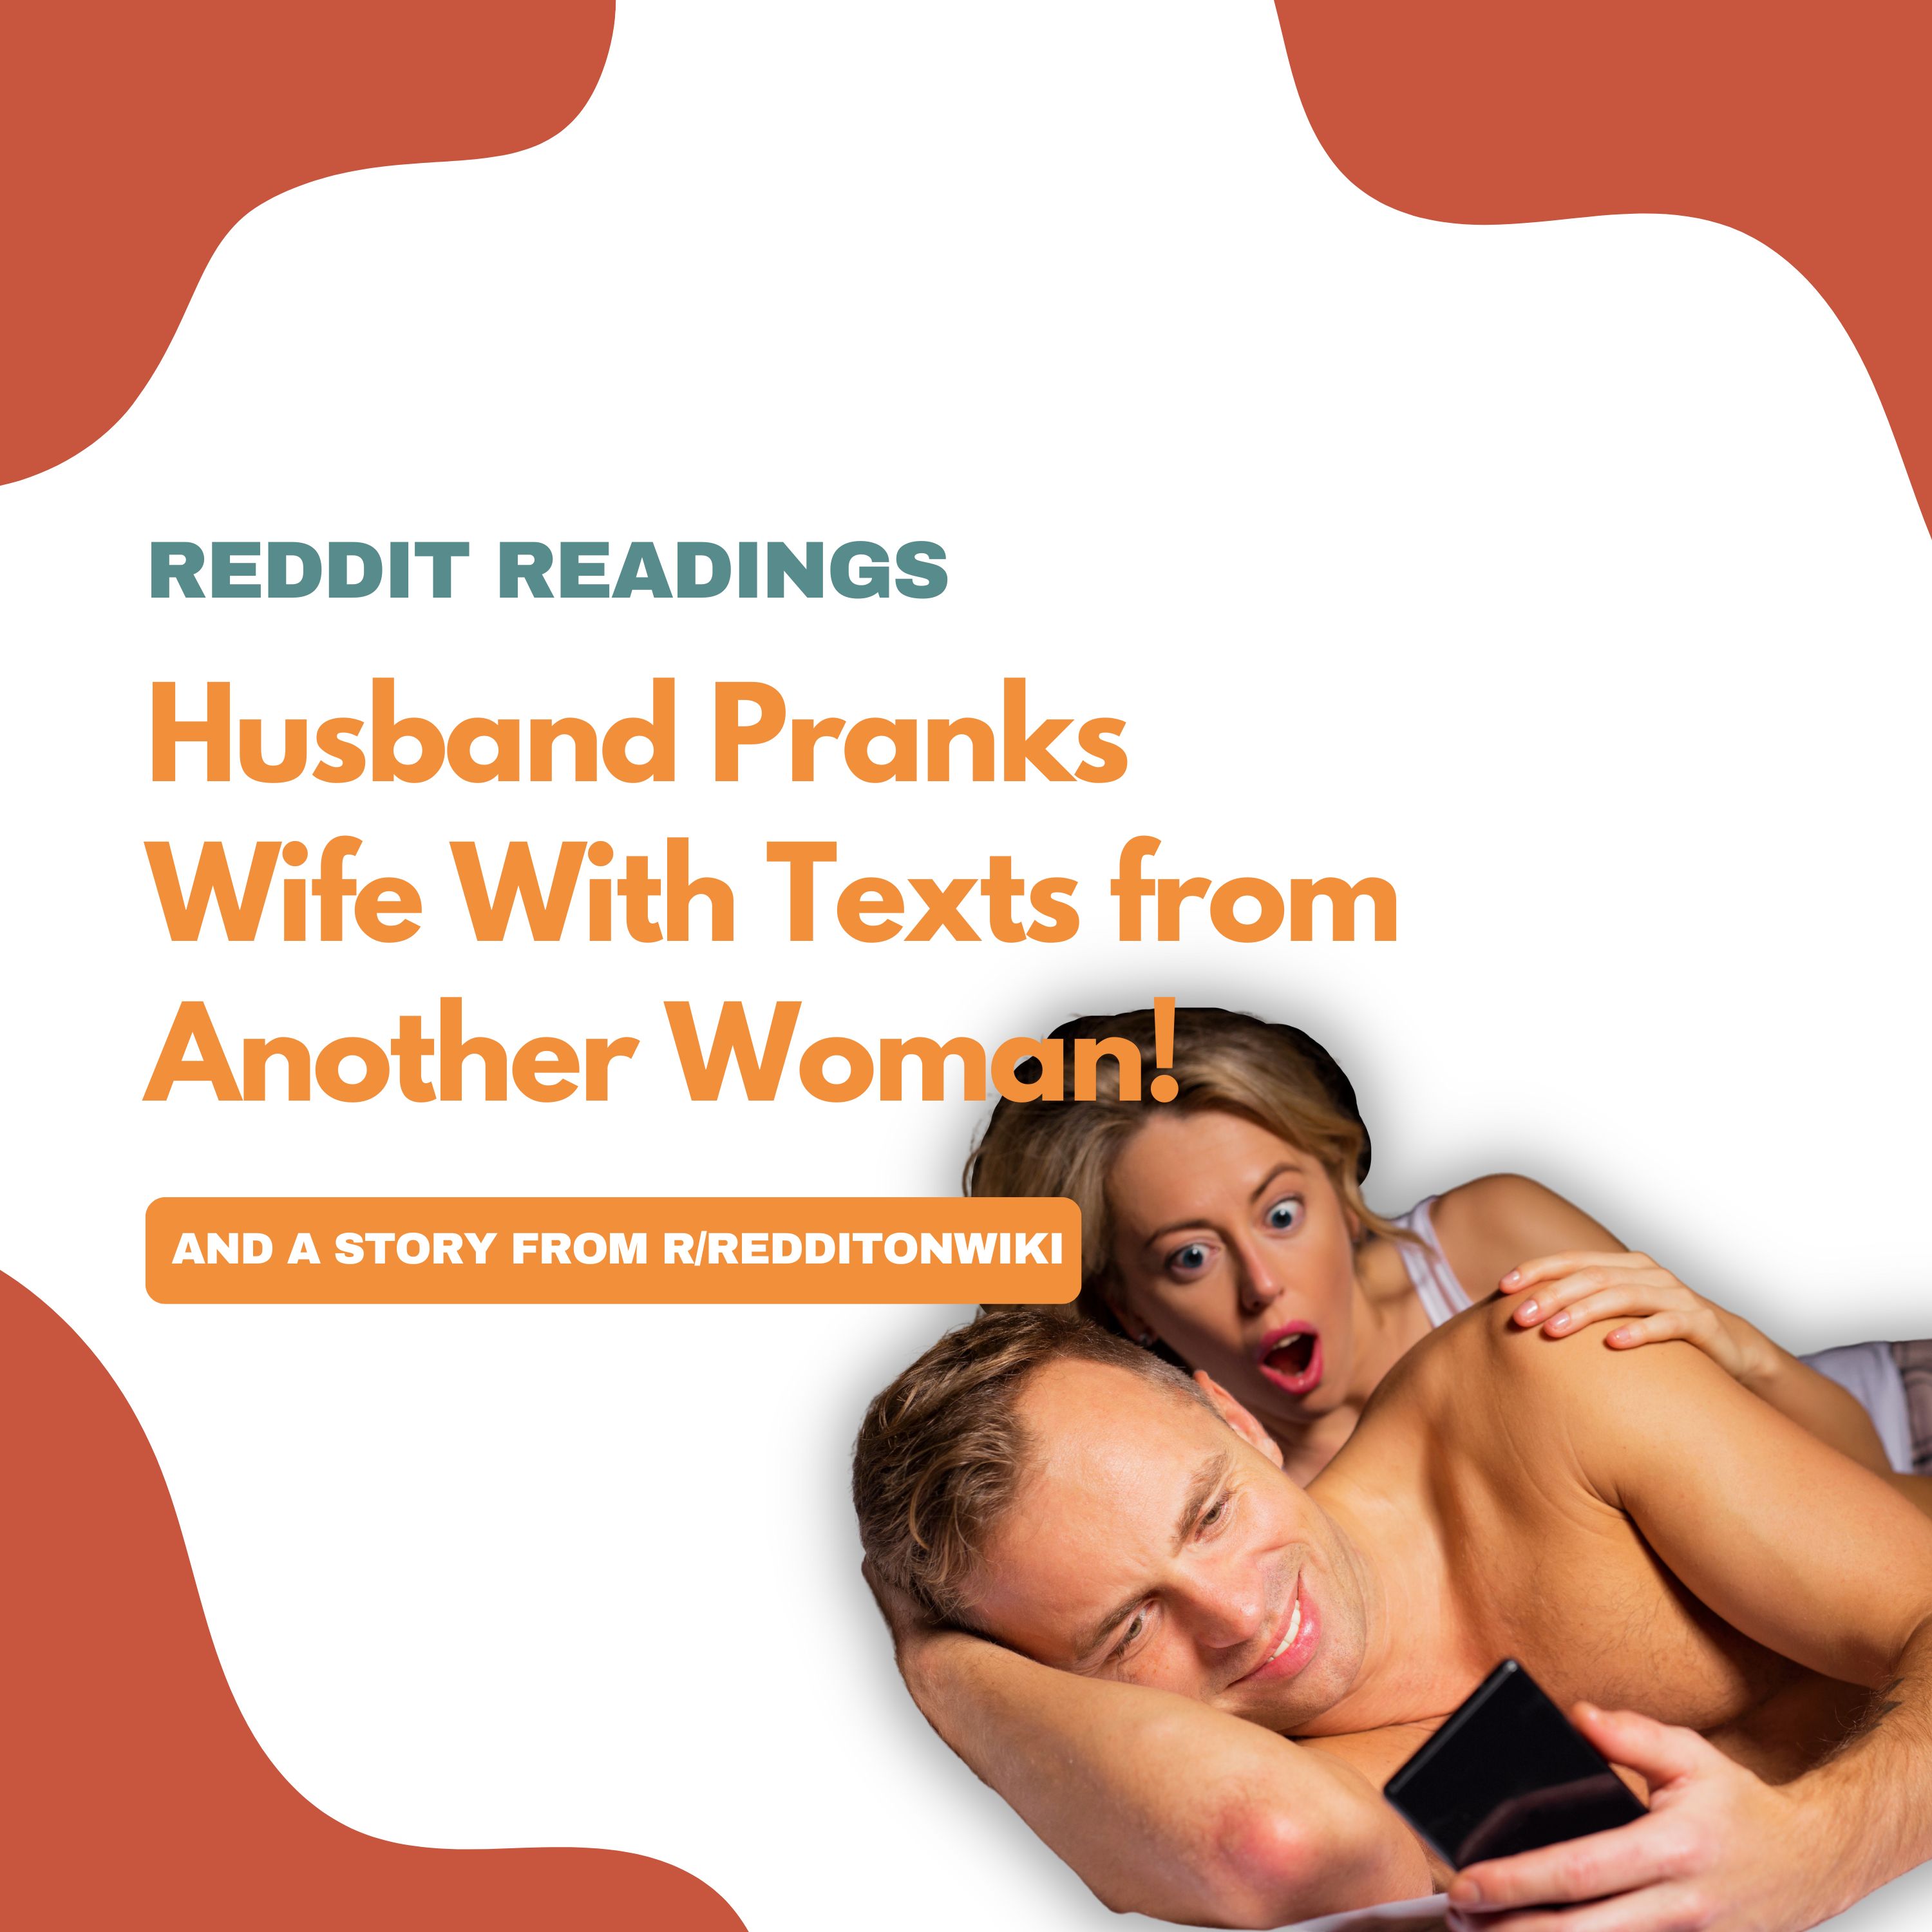 Reddit Readings | Gaslighting Husband Pranks Wife With Sexts from Another Woman!